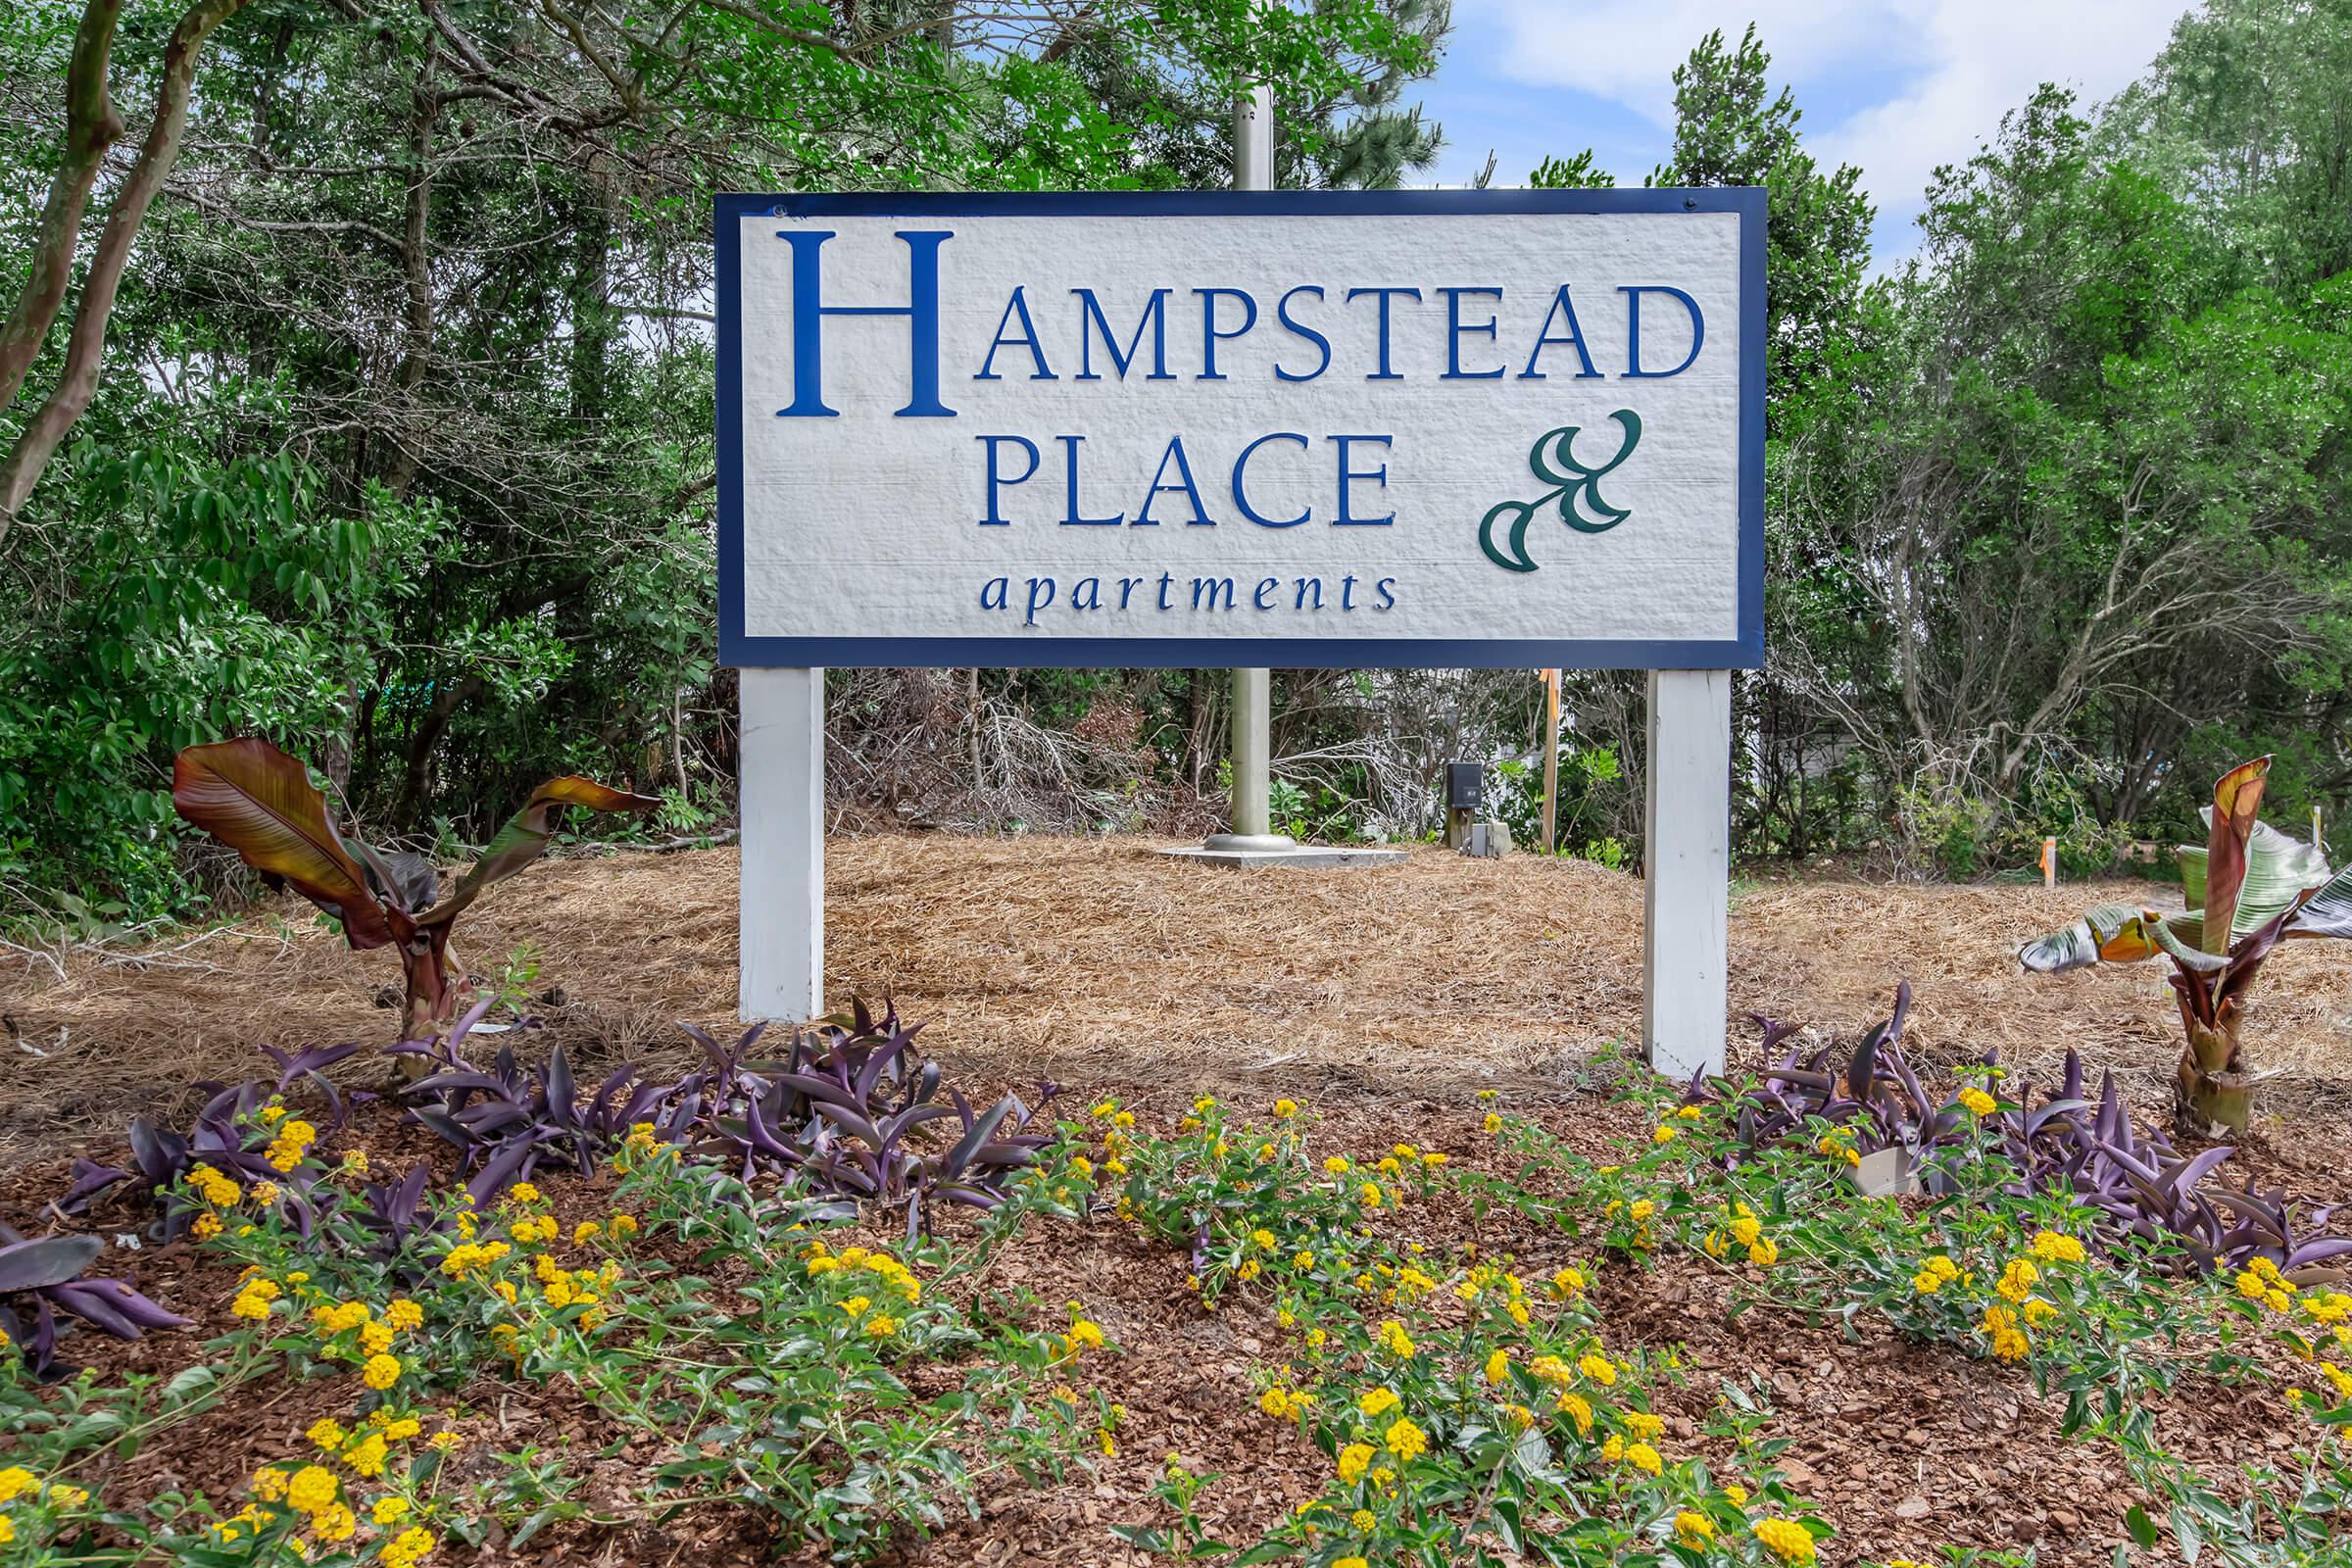 ENJOY GATHERINGS AT HAMPSTEAD PLACE APARTMENTS